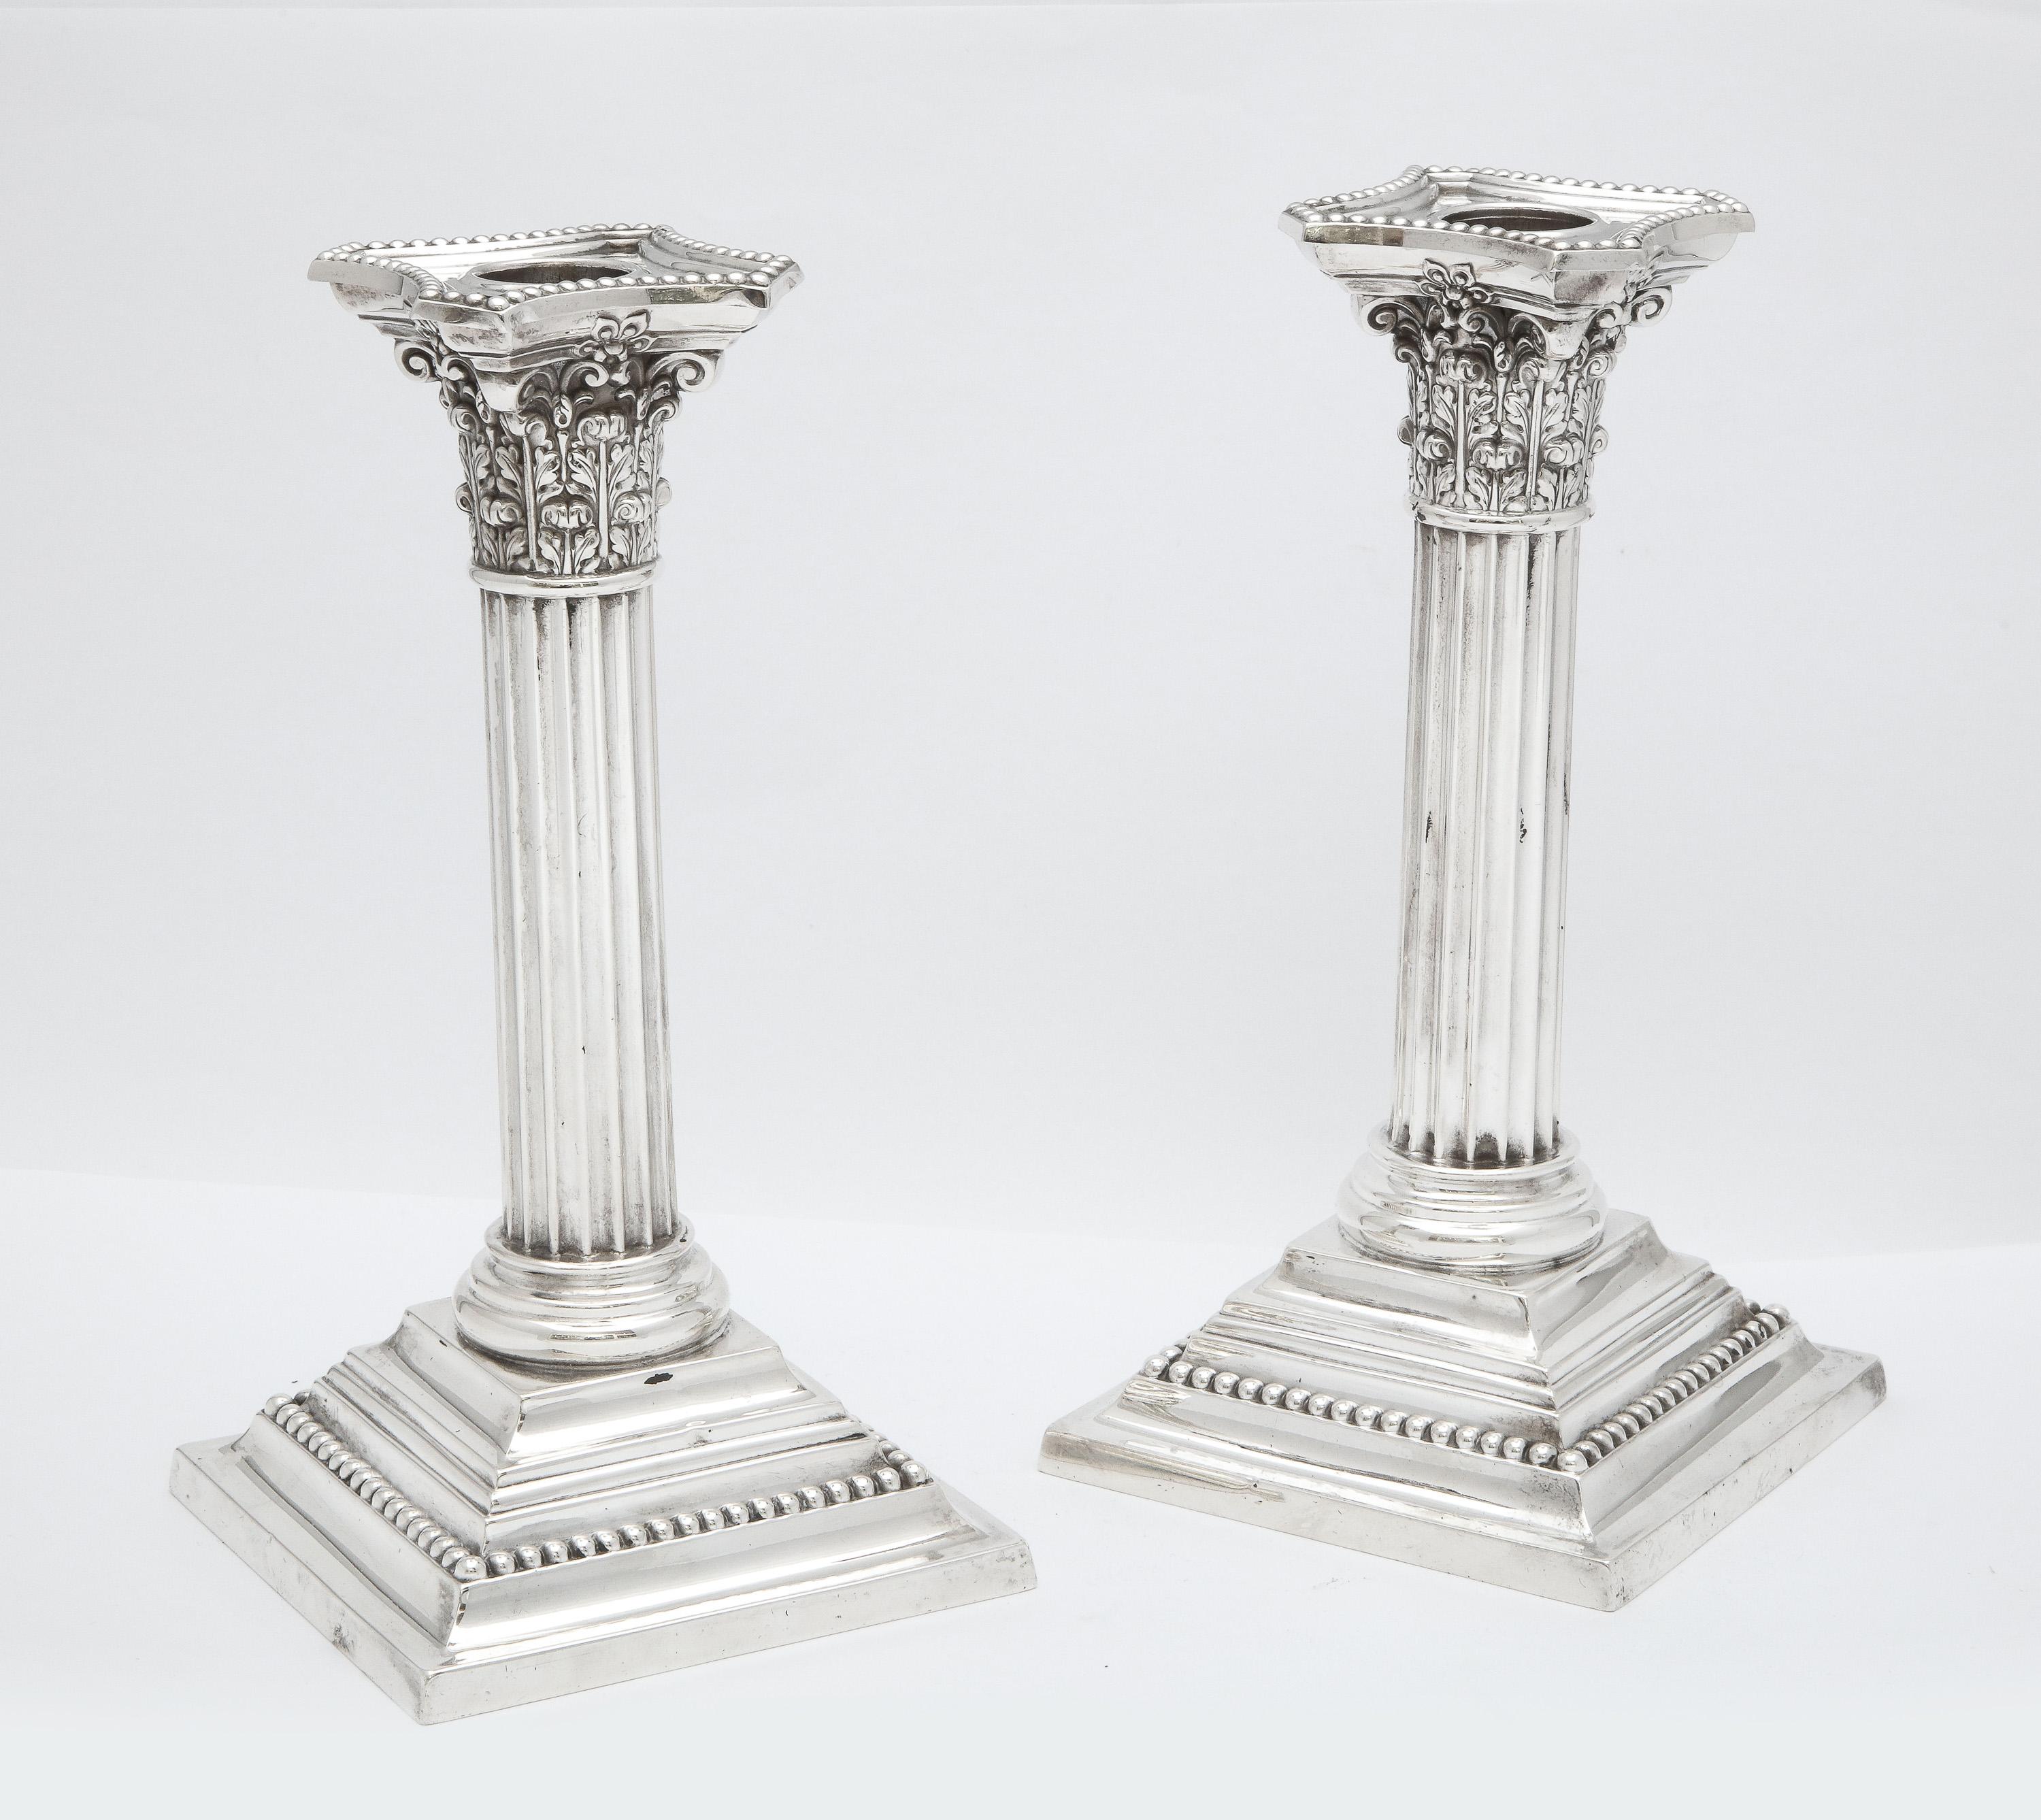 Pair of Edwardian period, Neoclassical-Style sterling silver candlesticks, Gorham Manufacturing Co., Providence, Rhode Island, year-hallmarked for 1906. Each candlestick measures 8 1/4 inches high x 4 1/4 inches deep (across base) x 4 1/4 inches